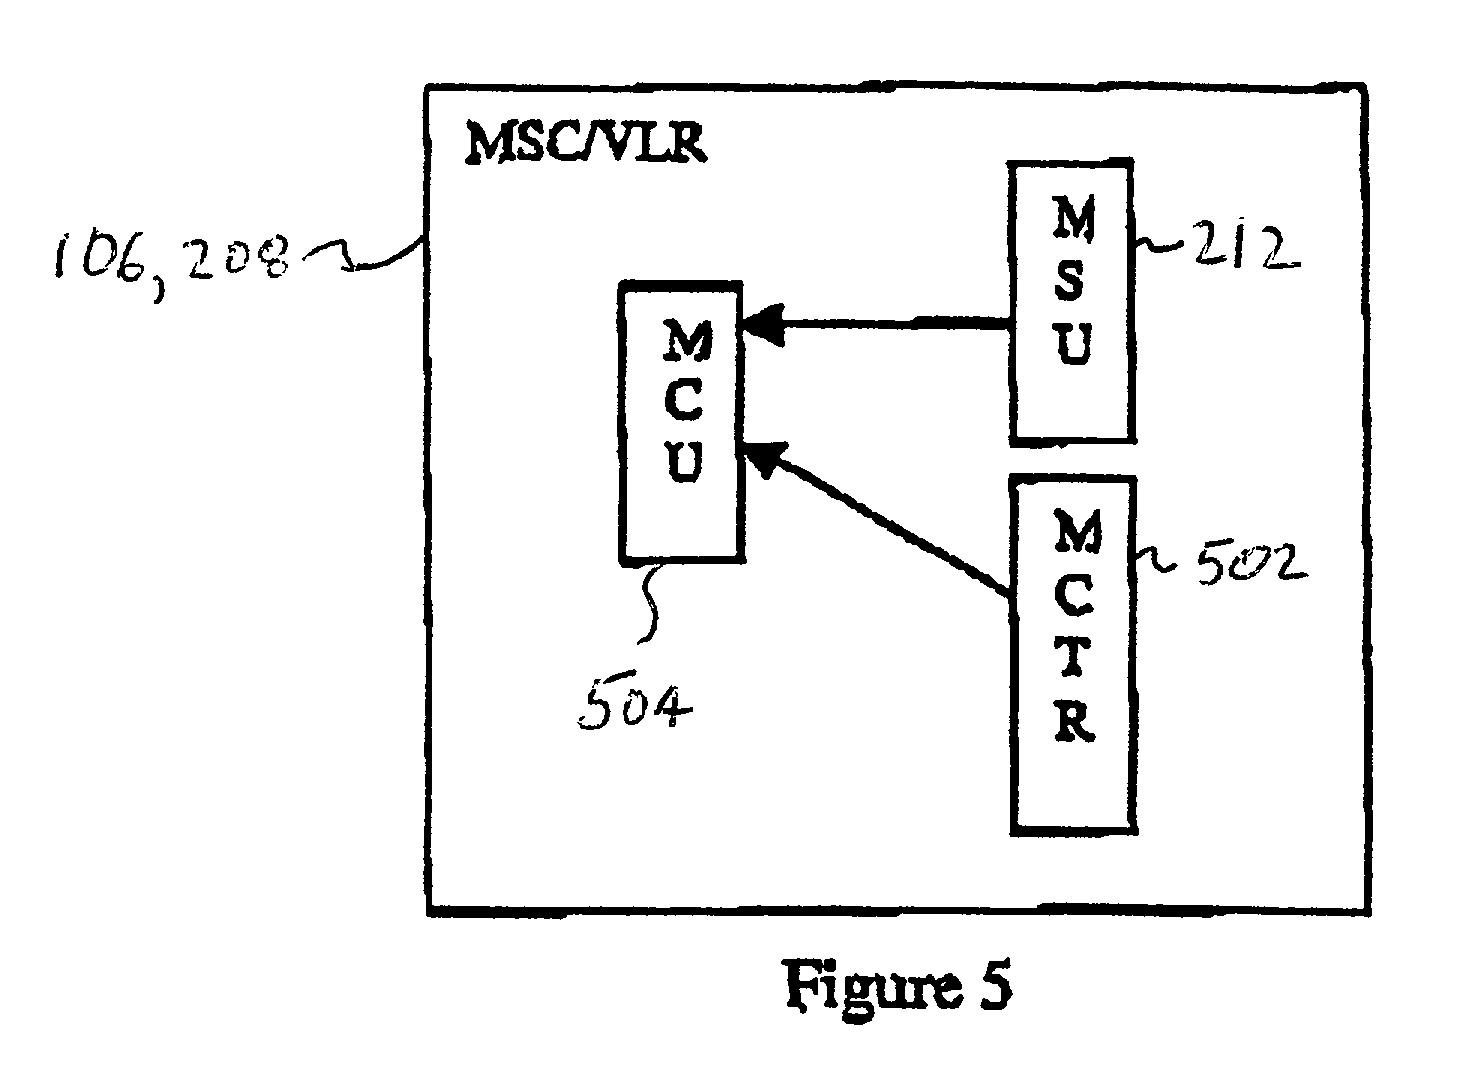 Method and system for exchange of multicall capabilities between terminal and network